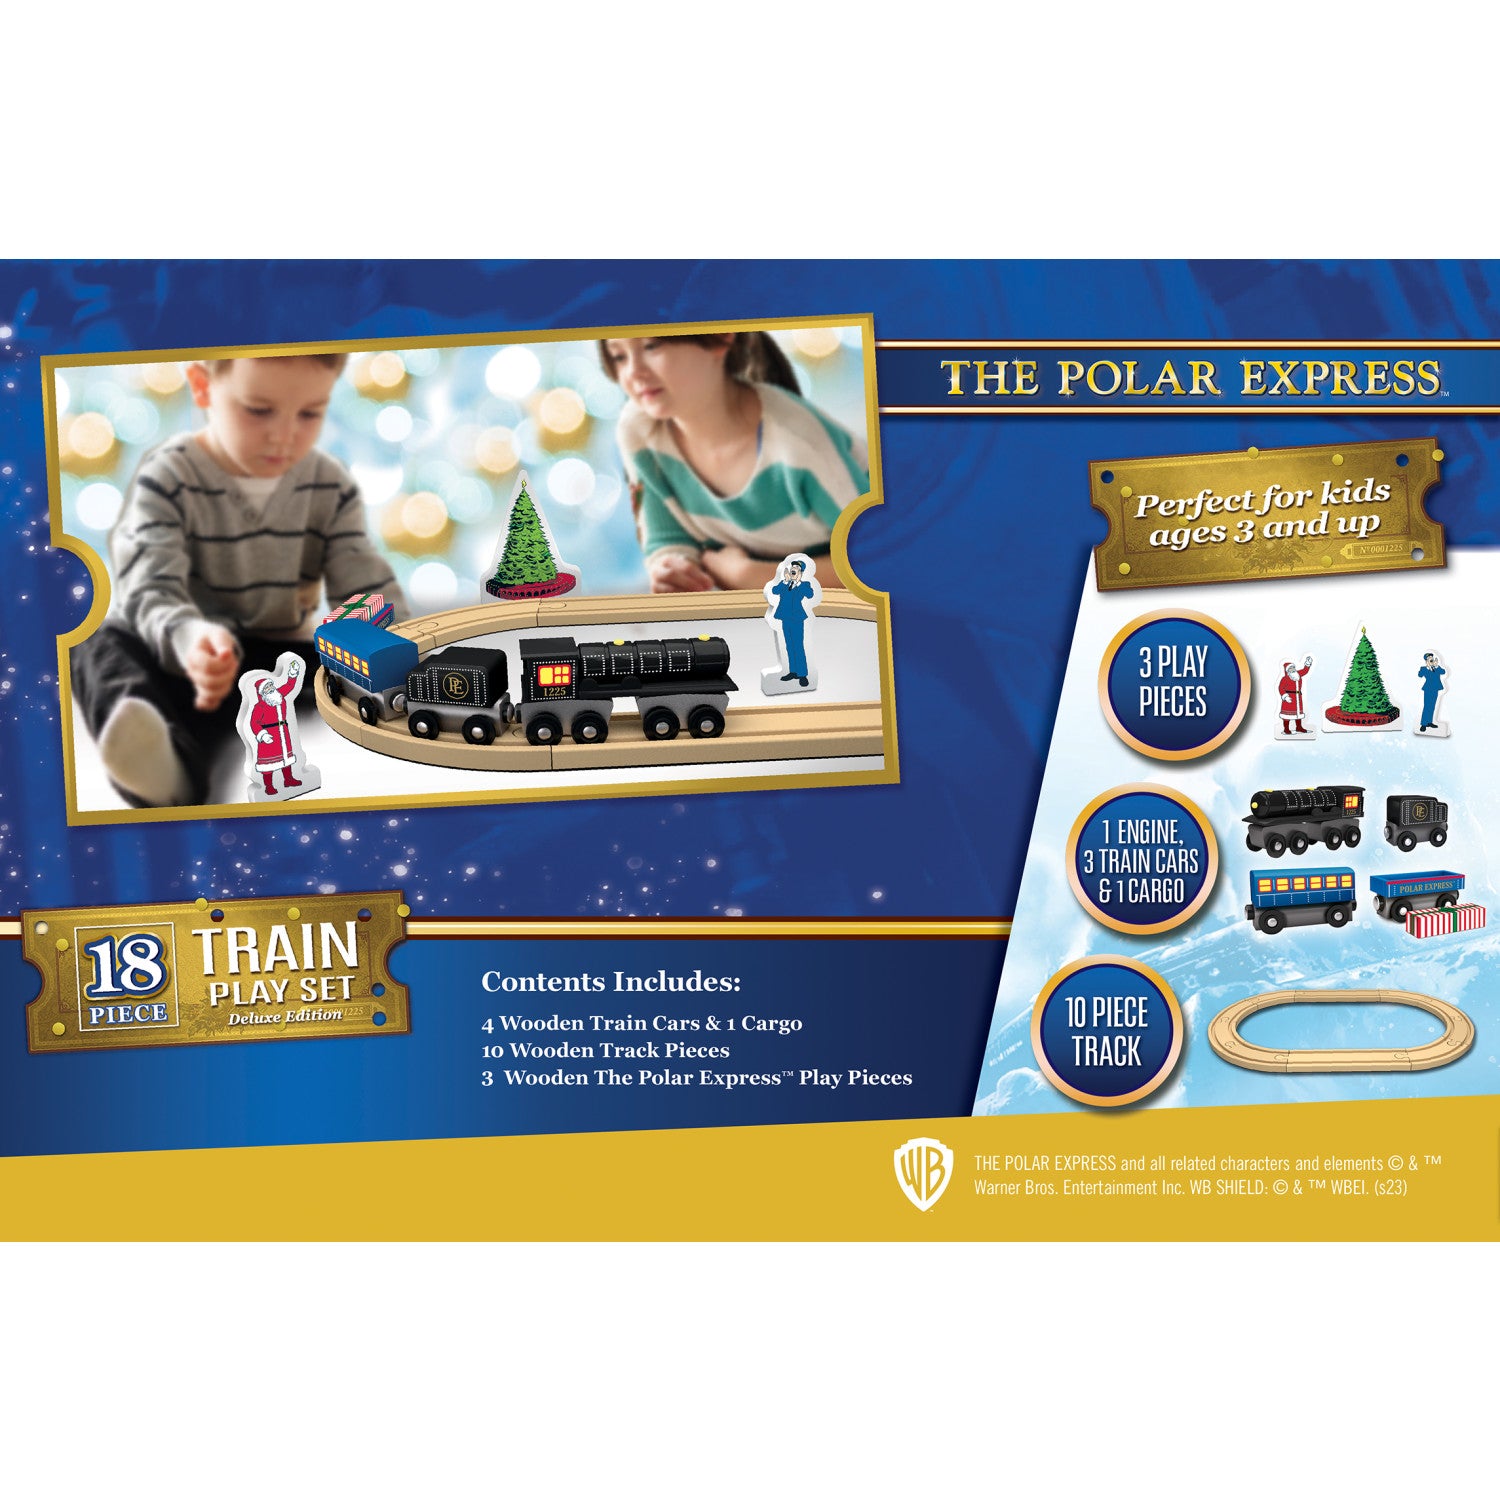 The Polar Express Toy Train Set - Deluxe Edition